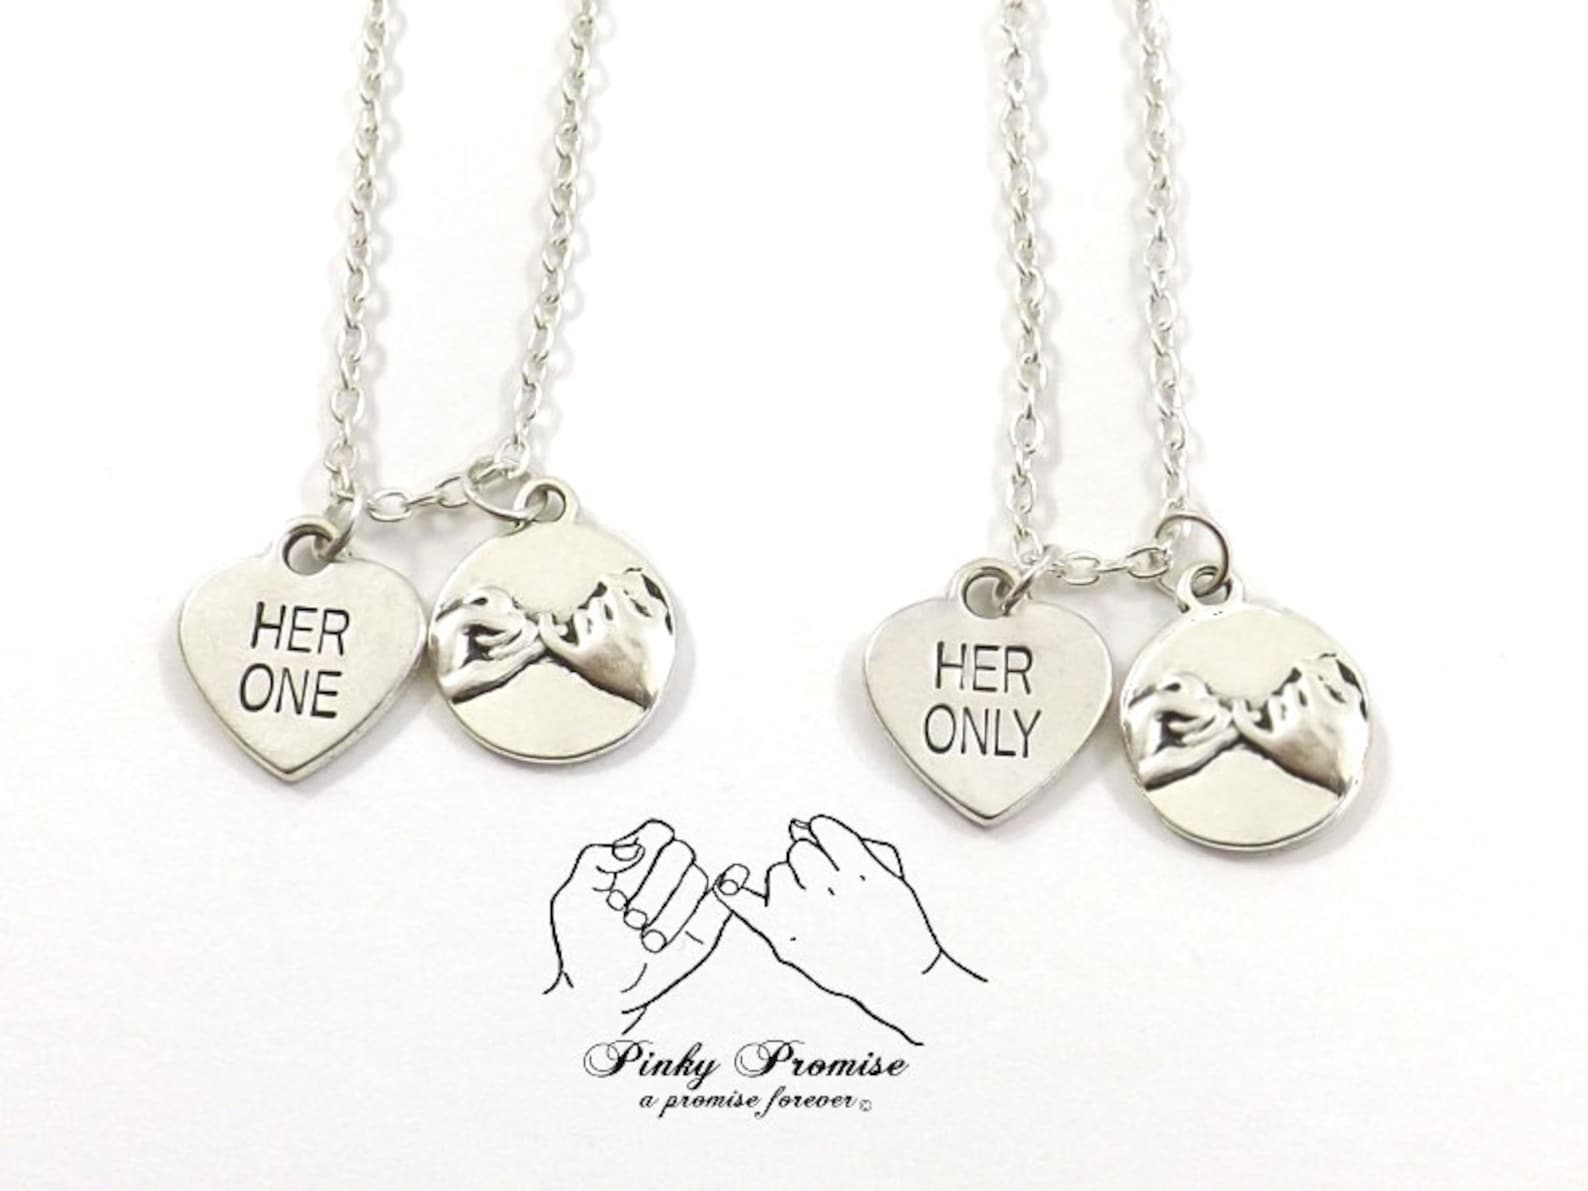 2 Her One Her Only Pinky Promise Necklaces, LGBT Necklaces, Lesbian Couples Jewel...